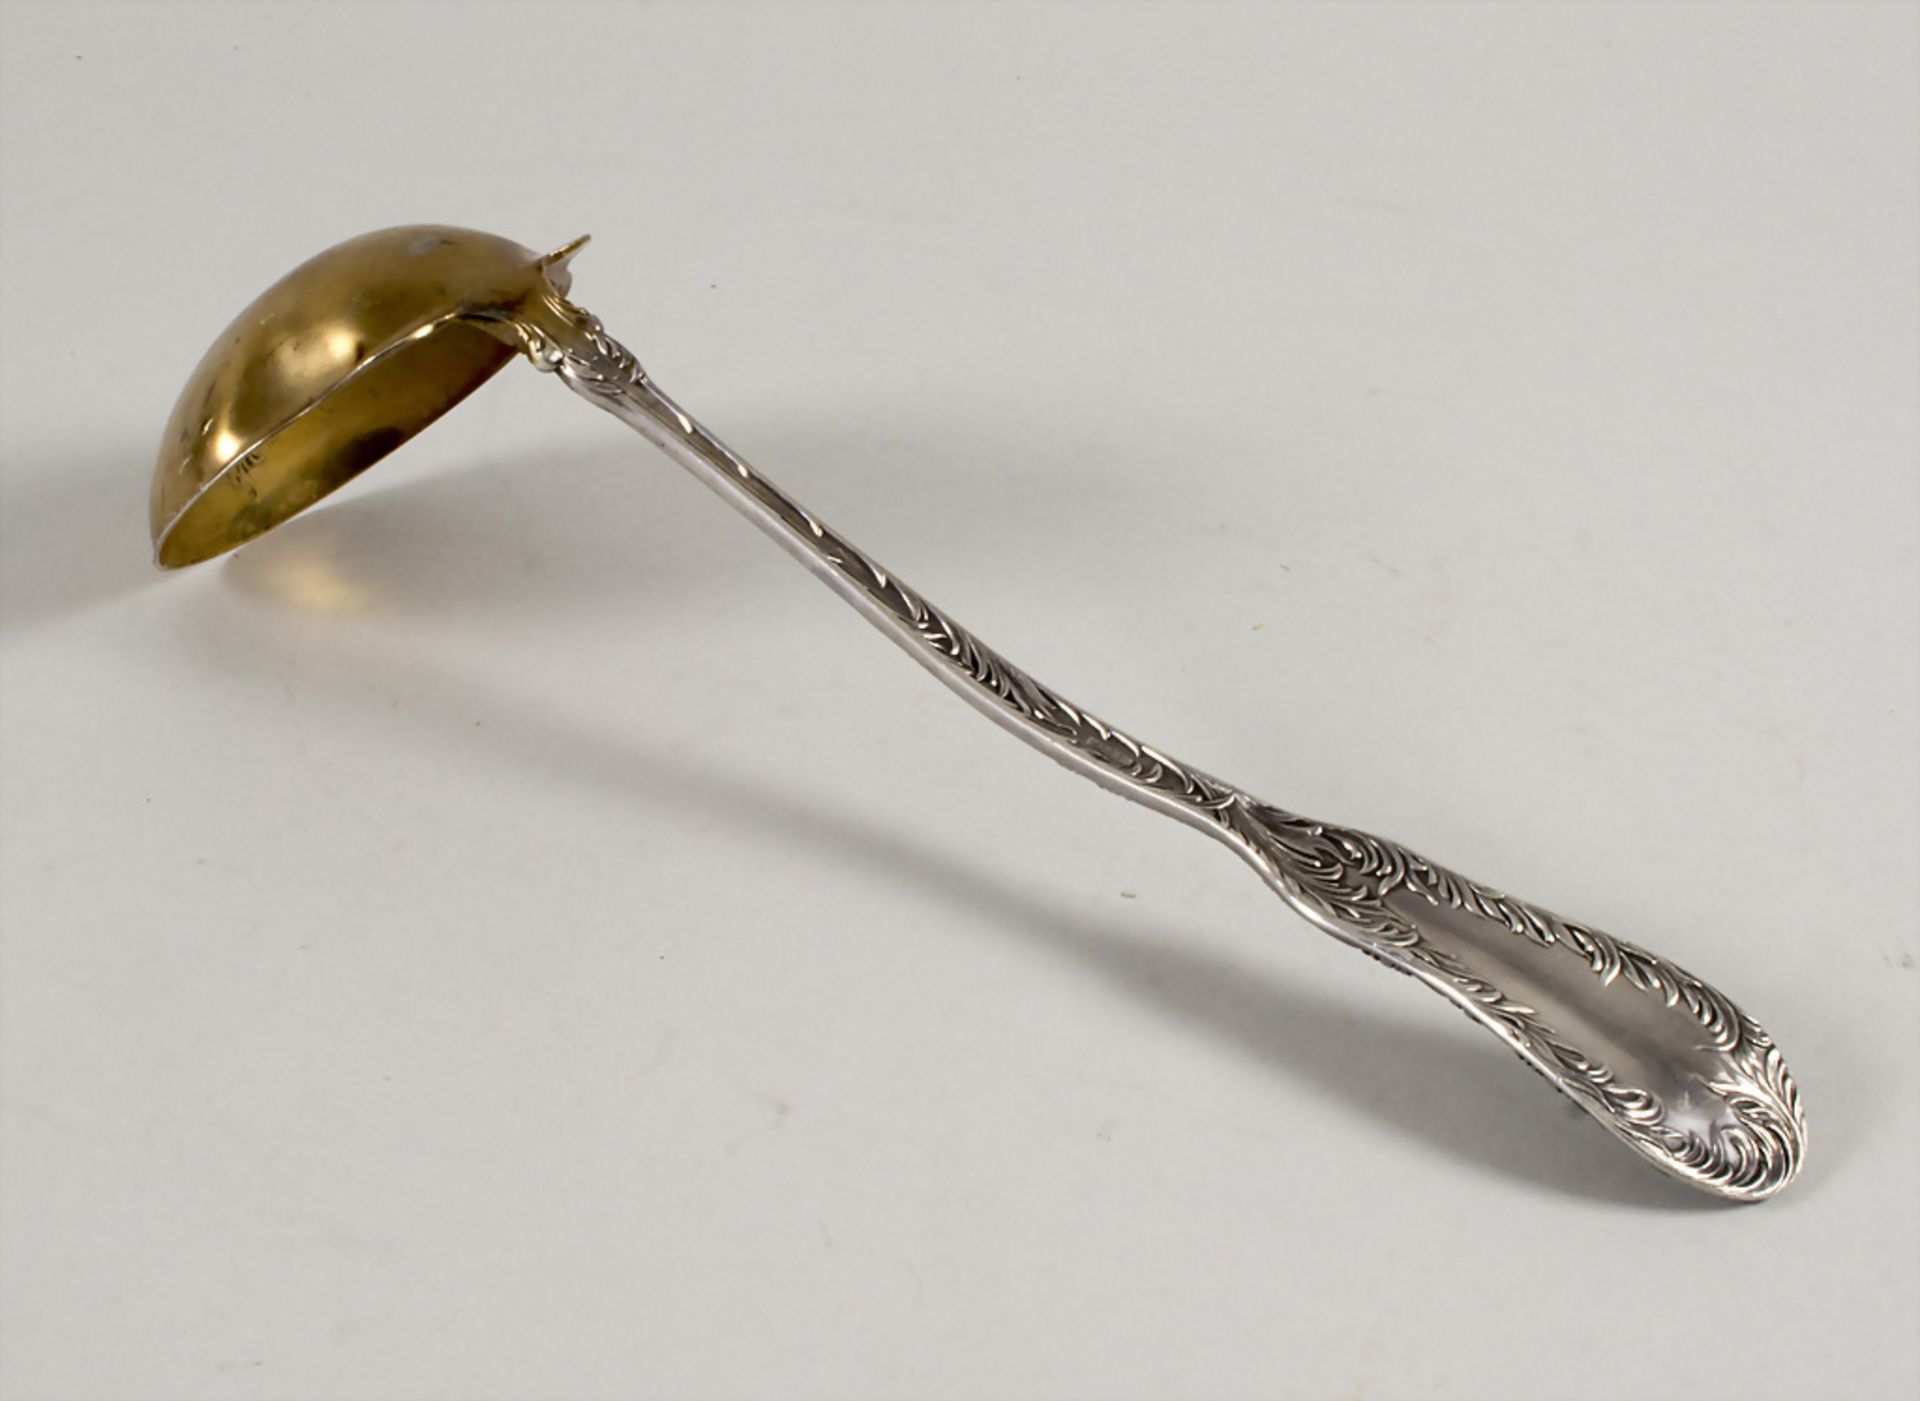 Suppenkelle 'No. 10' / A silver blossom soup ladle 'No. 10', Dominick & Haff, New York, um 1896 - Image 2 of 7